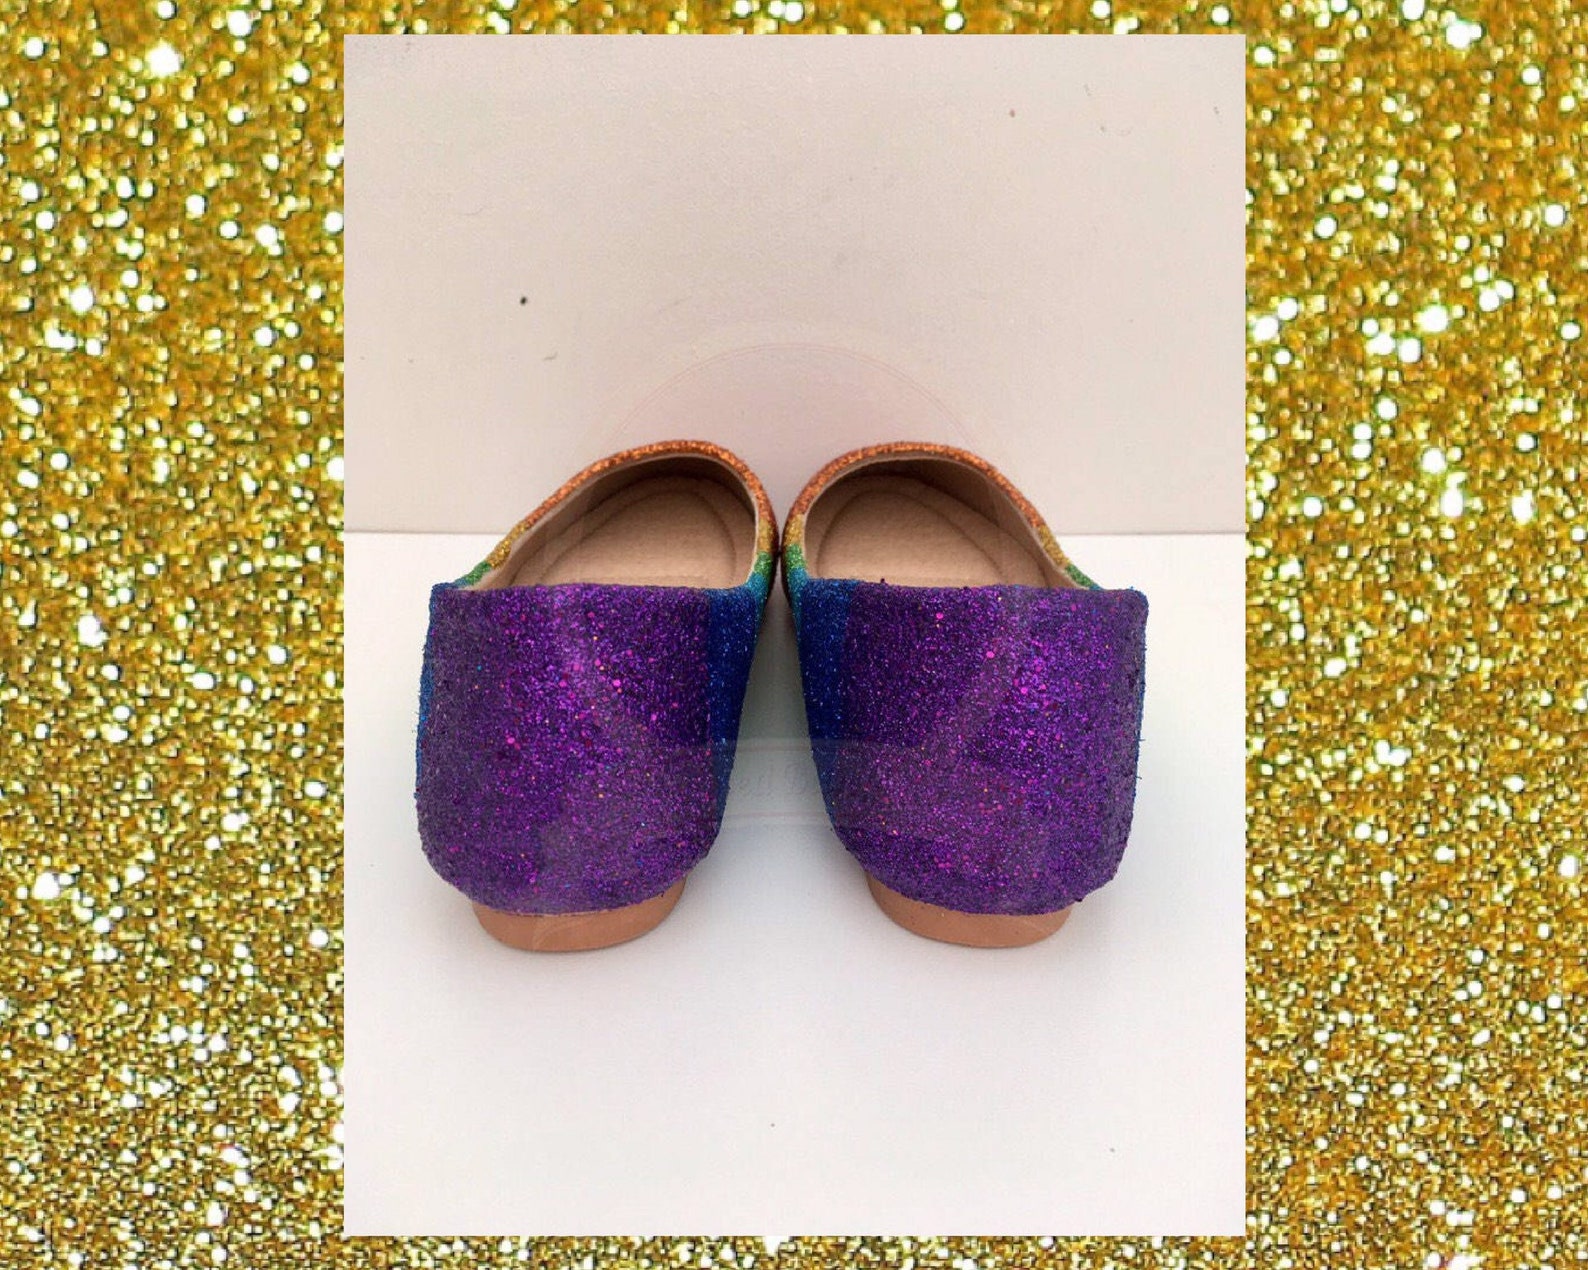 rainbow shoes for women, glitter shoes for women, rainbow glitter shoes, rainbow gift for women, ballet flat wedding shoes, prom